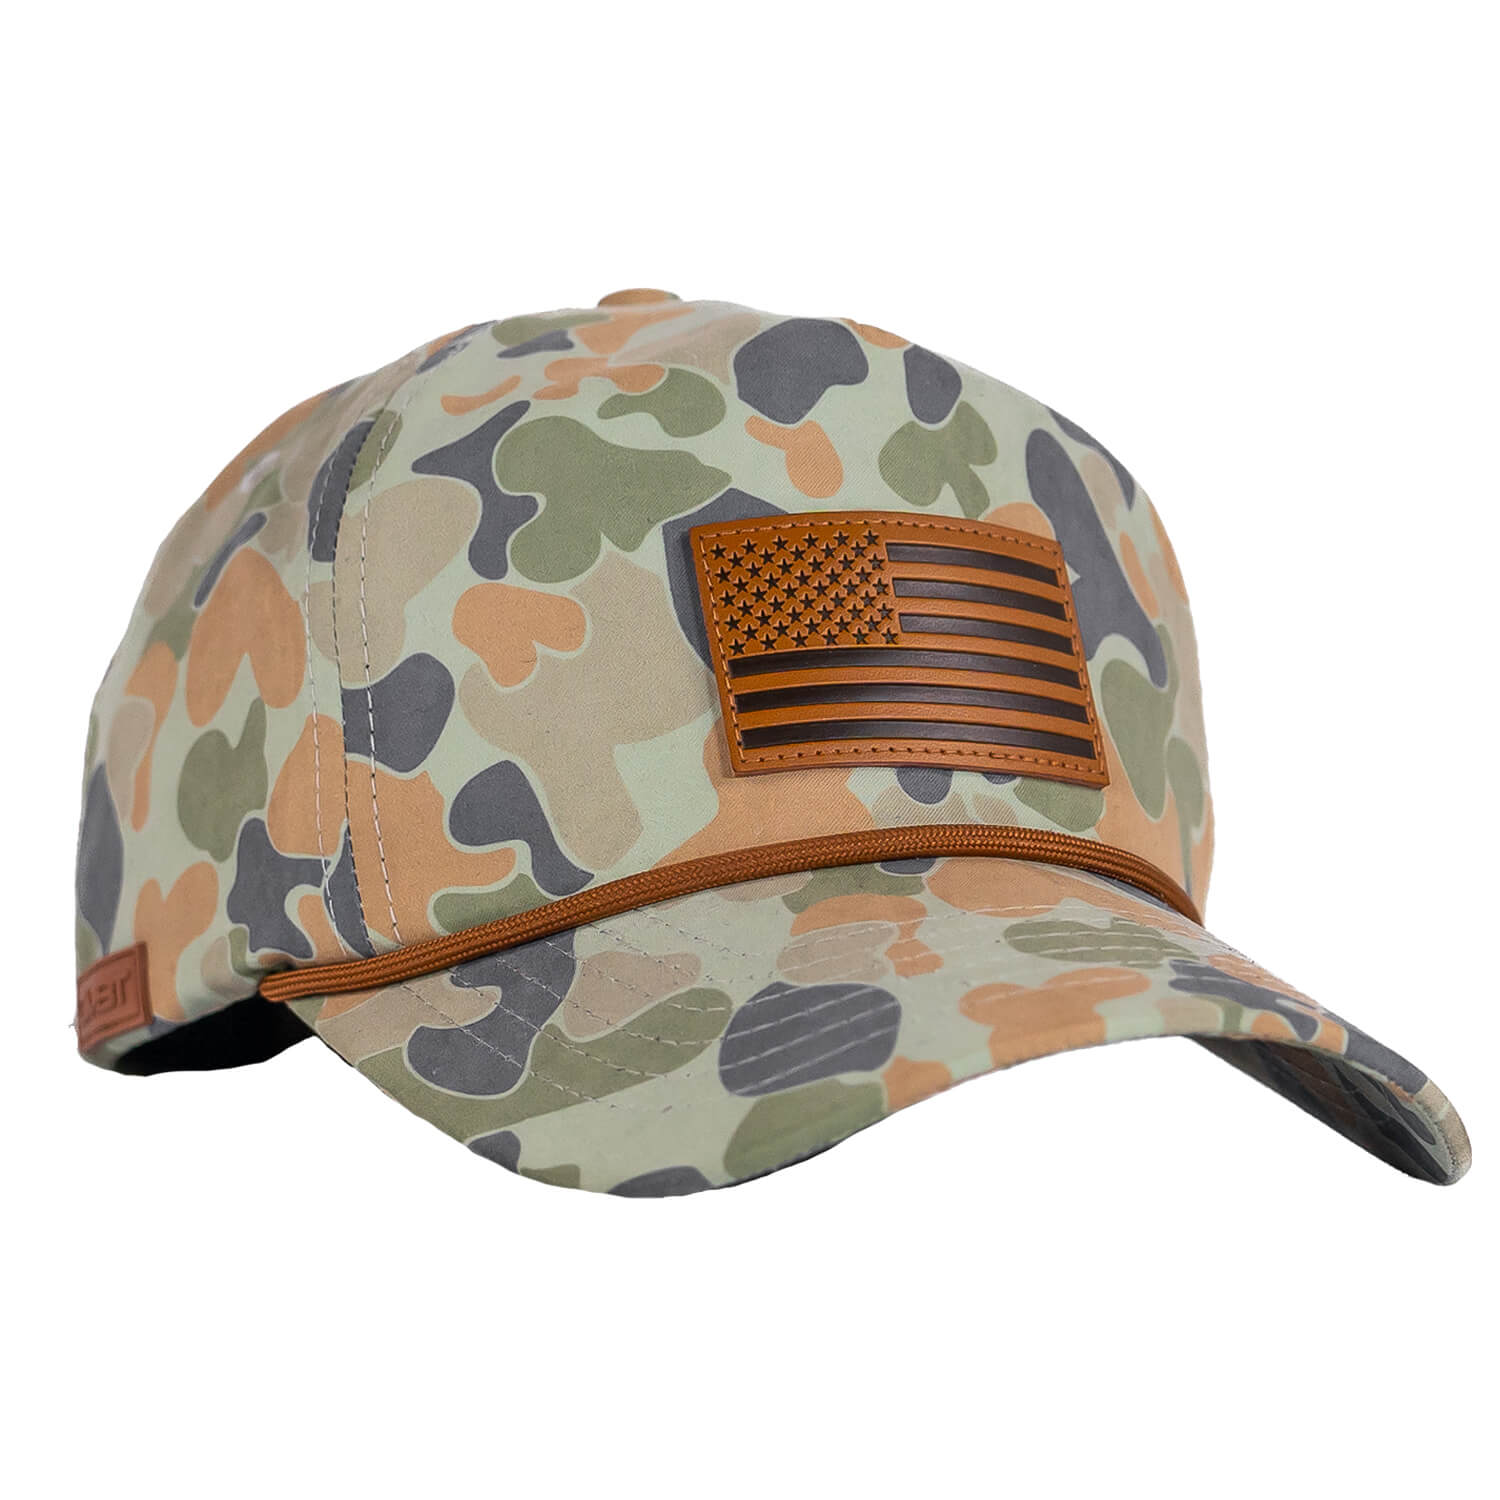 Outdoors | Duck Camo Combat Snapback Frogskin Iron Apparel Crushable